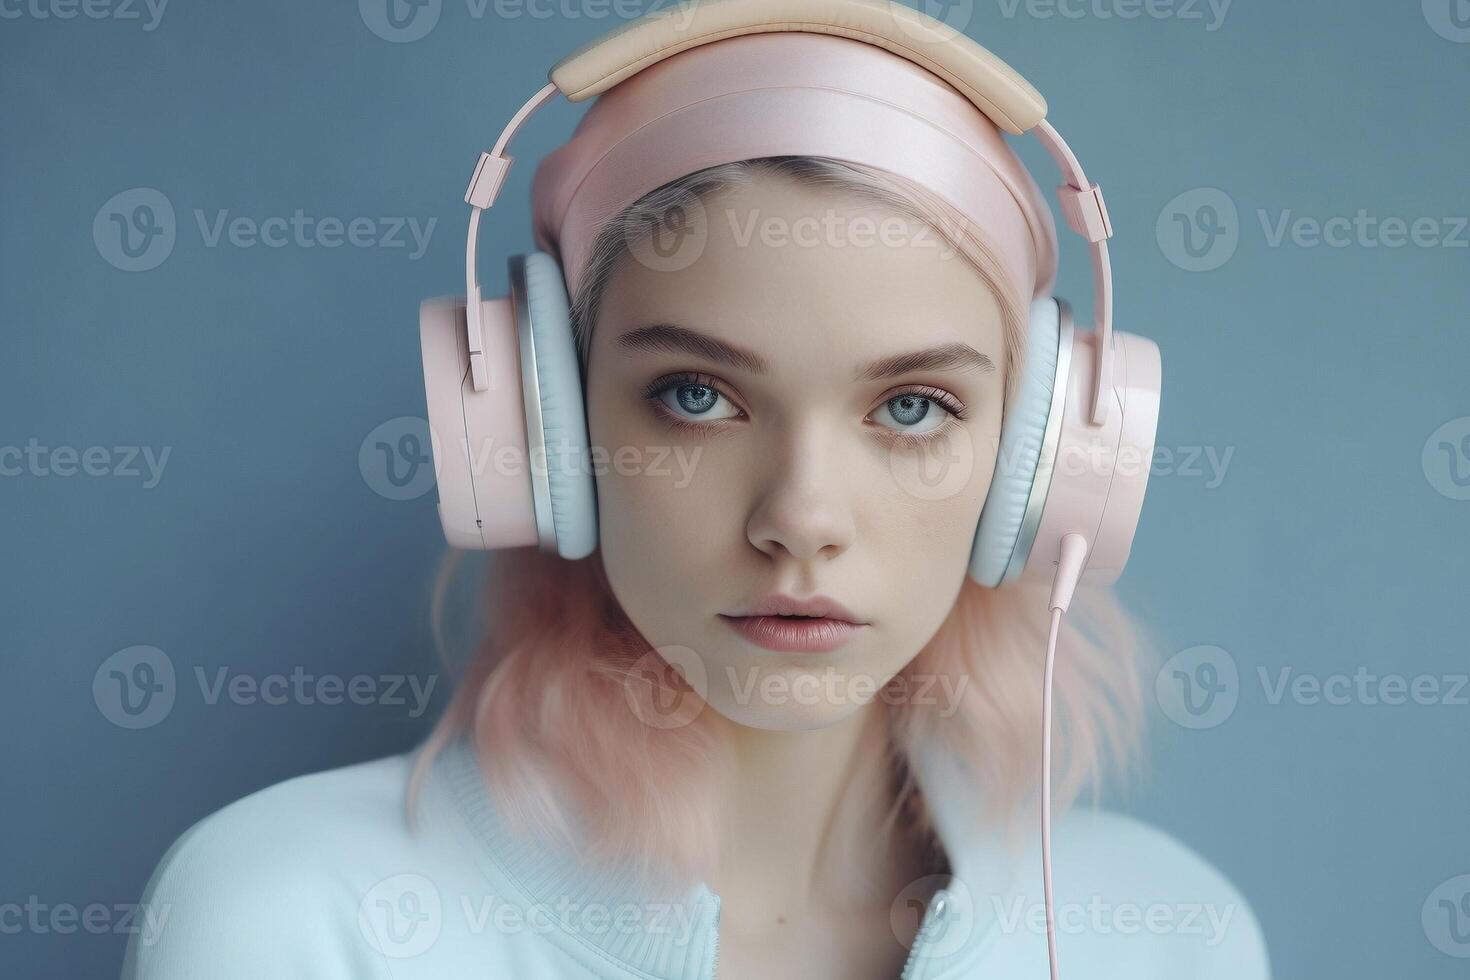 Young woman listem music with wireless headphones created with photo